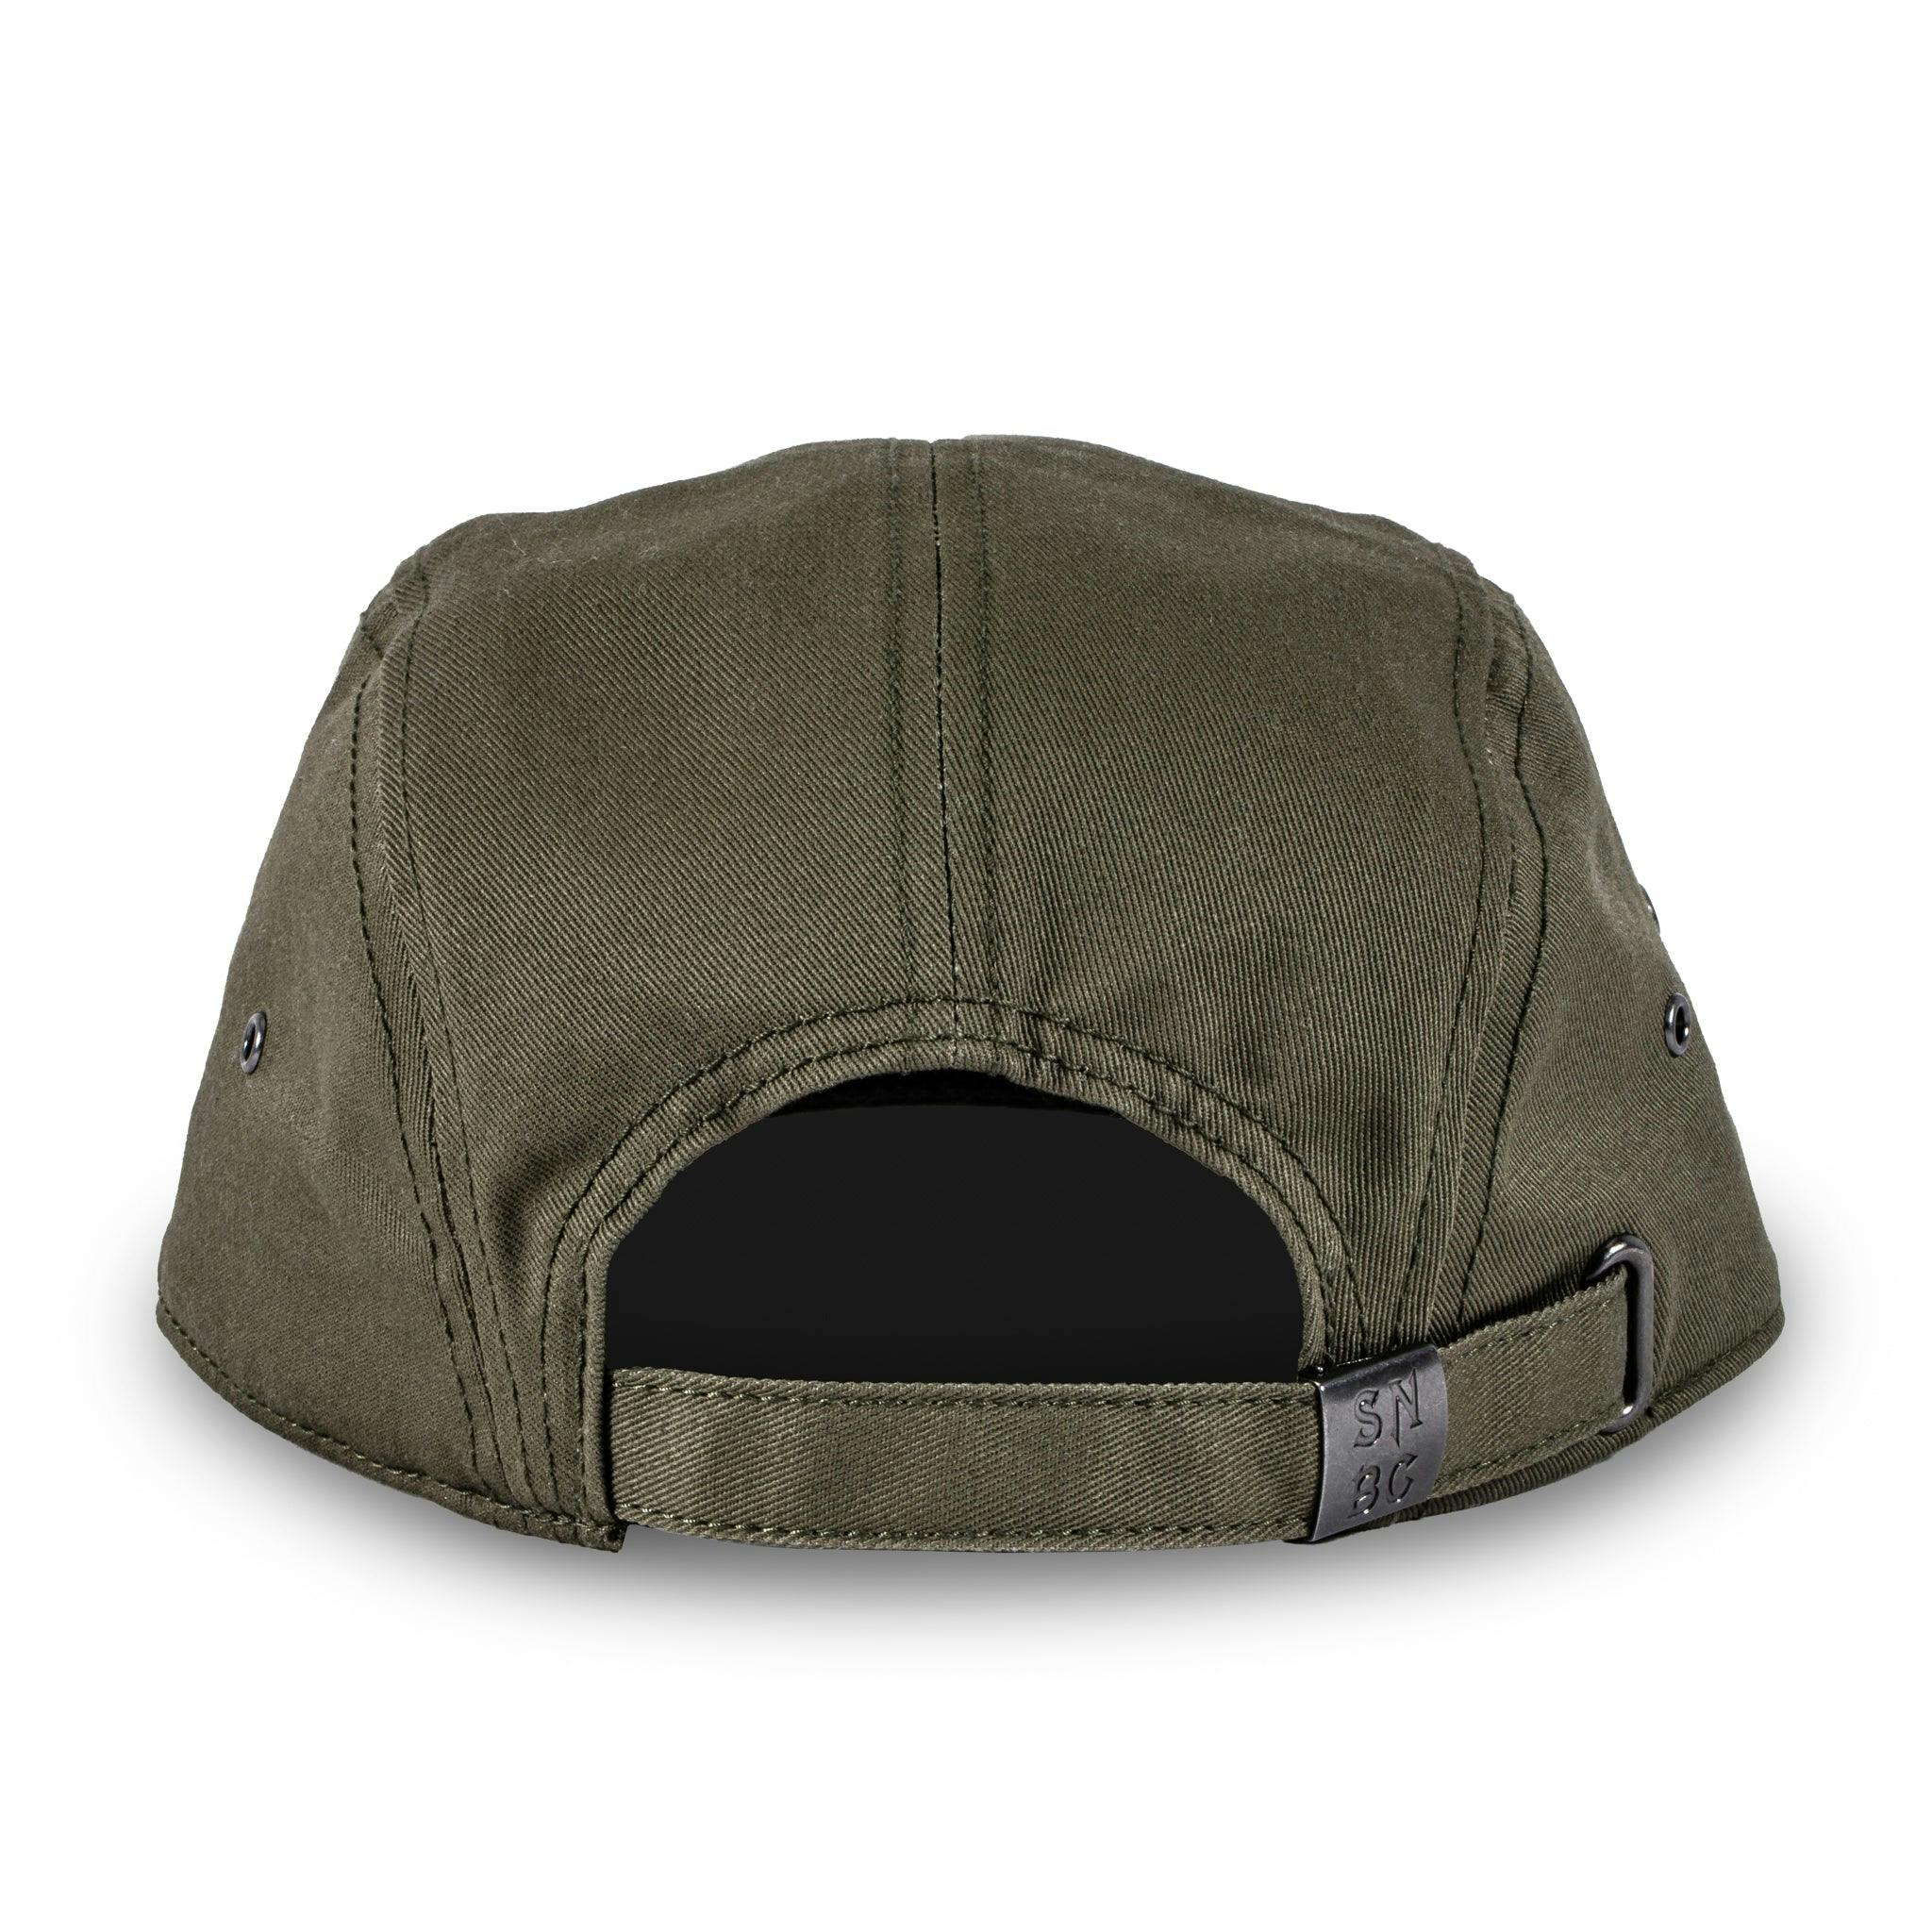 Back view of the Sierra Nevada diamond patch green camper hat